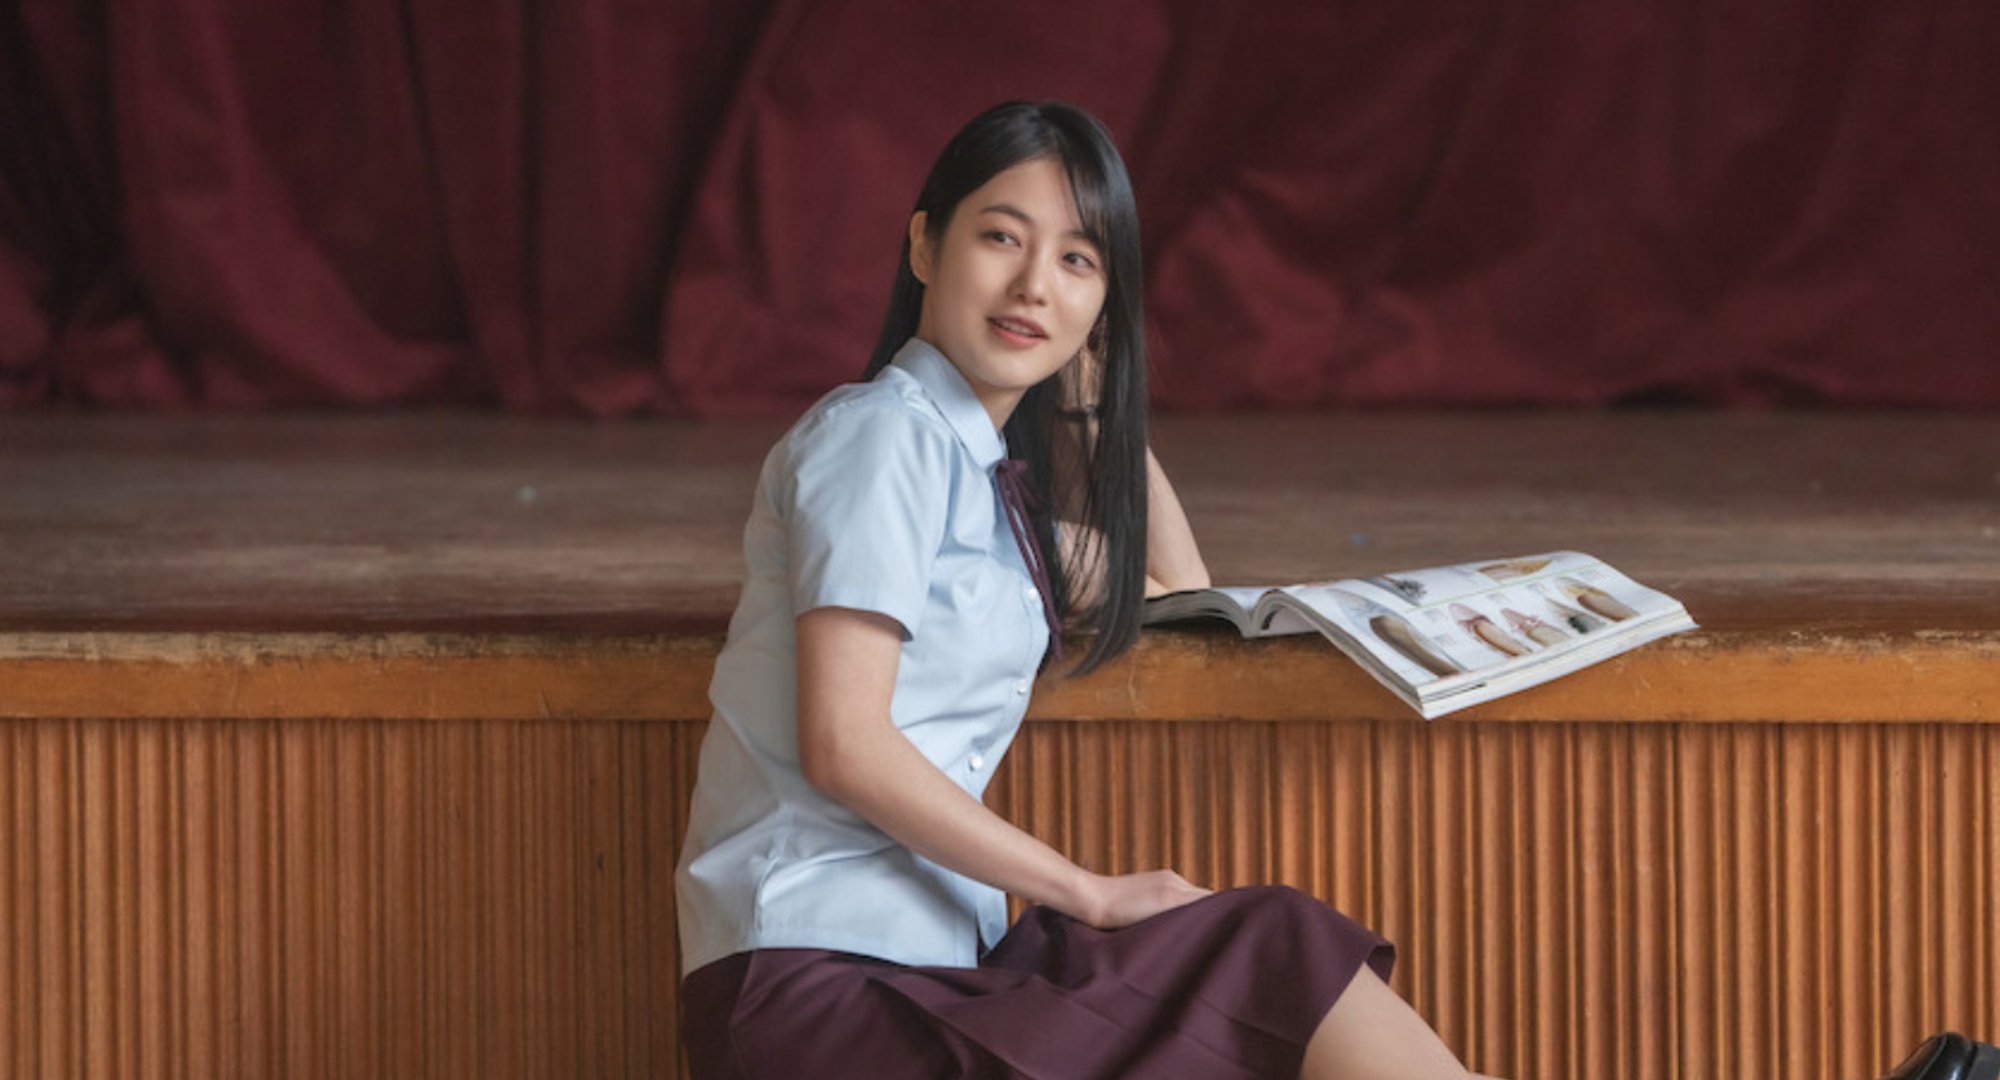 ‘The Glory’: Shin Ye-eun Lost Followers Portraying the Younger Version of the Main Bully